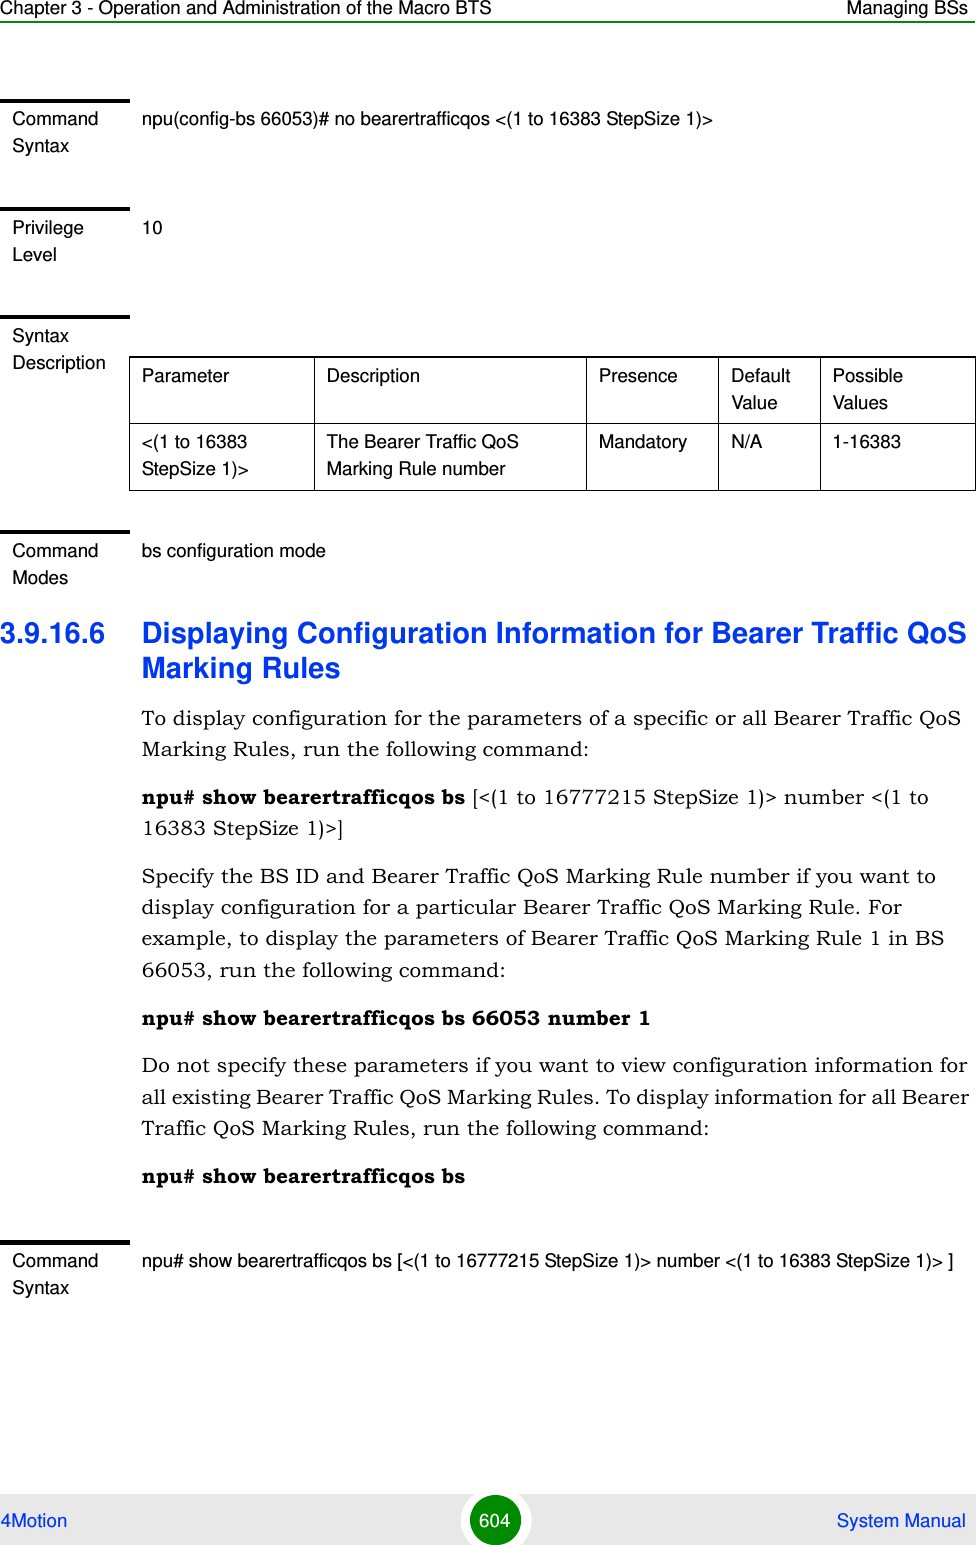 Chapter 3 - Operation and Administration of the Macro BTS Managing BSs4Motion 604  System Manual3.9.16.6 Displaying Configuration Information for Bearer Traffic QoS Marking RulesTo display configuration for the parameters of a specific or all Bearer Traffic QoS Marking Rules, run the following command:npu# show bearertrafficqos bs [&lt;(1 to 16777215 StepSize 1)&gt; number &lt;(1 to 16383 StepSize 1)&gt;]Specify the BS ID and Bearer Traffic QoS Marking Rule number if you want to display configuration for a particular Bearer Traffic QoS Marking Rule. For example, to display the parameters of Bearer Traffic QoS Marking Rule 1 in BS 66053, run the following command:npu# show bearertrafficqos bs 66053 number 1Do not specify these parameters if you want to view configuration information for all existing Bearer Traffic QoS Marking Rules. To display information for all Bearer Traffic QoS Marking Rules, run the following command:npu# show bearertrafficqos bsCommand Syntaxnpu(config-bs 66053)# no bearertrafficqos &lt;(1 to 16383 StepSize 1)&gt; Privilege Level10Syntax Description Parameter Description Presence Default ValuePossible Values&lt;(1 to 16383 StepSize 1)&gt;The Bearer Traffic QoS Marking Rule number Mandatory N/A 1-16383Command Modesbs configuration modeCommand Syntaxnpu# show bearertrafficqos bs [&lt;(1 to 16777215 StepSize 1)&gt; number &lt;(1 to 16383 StepSize 1)&gt; ]